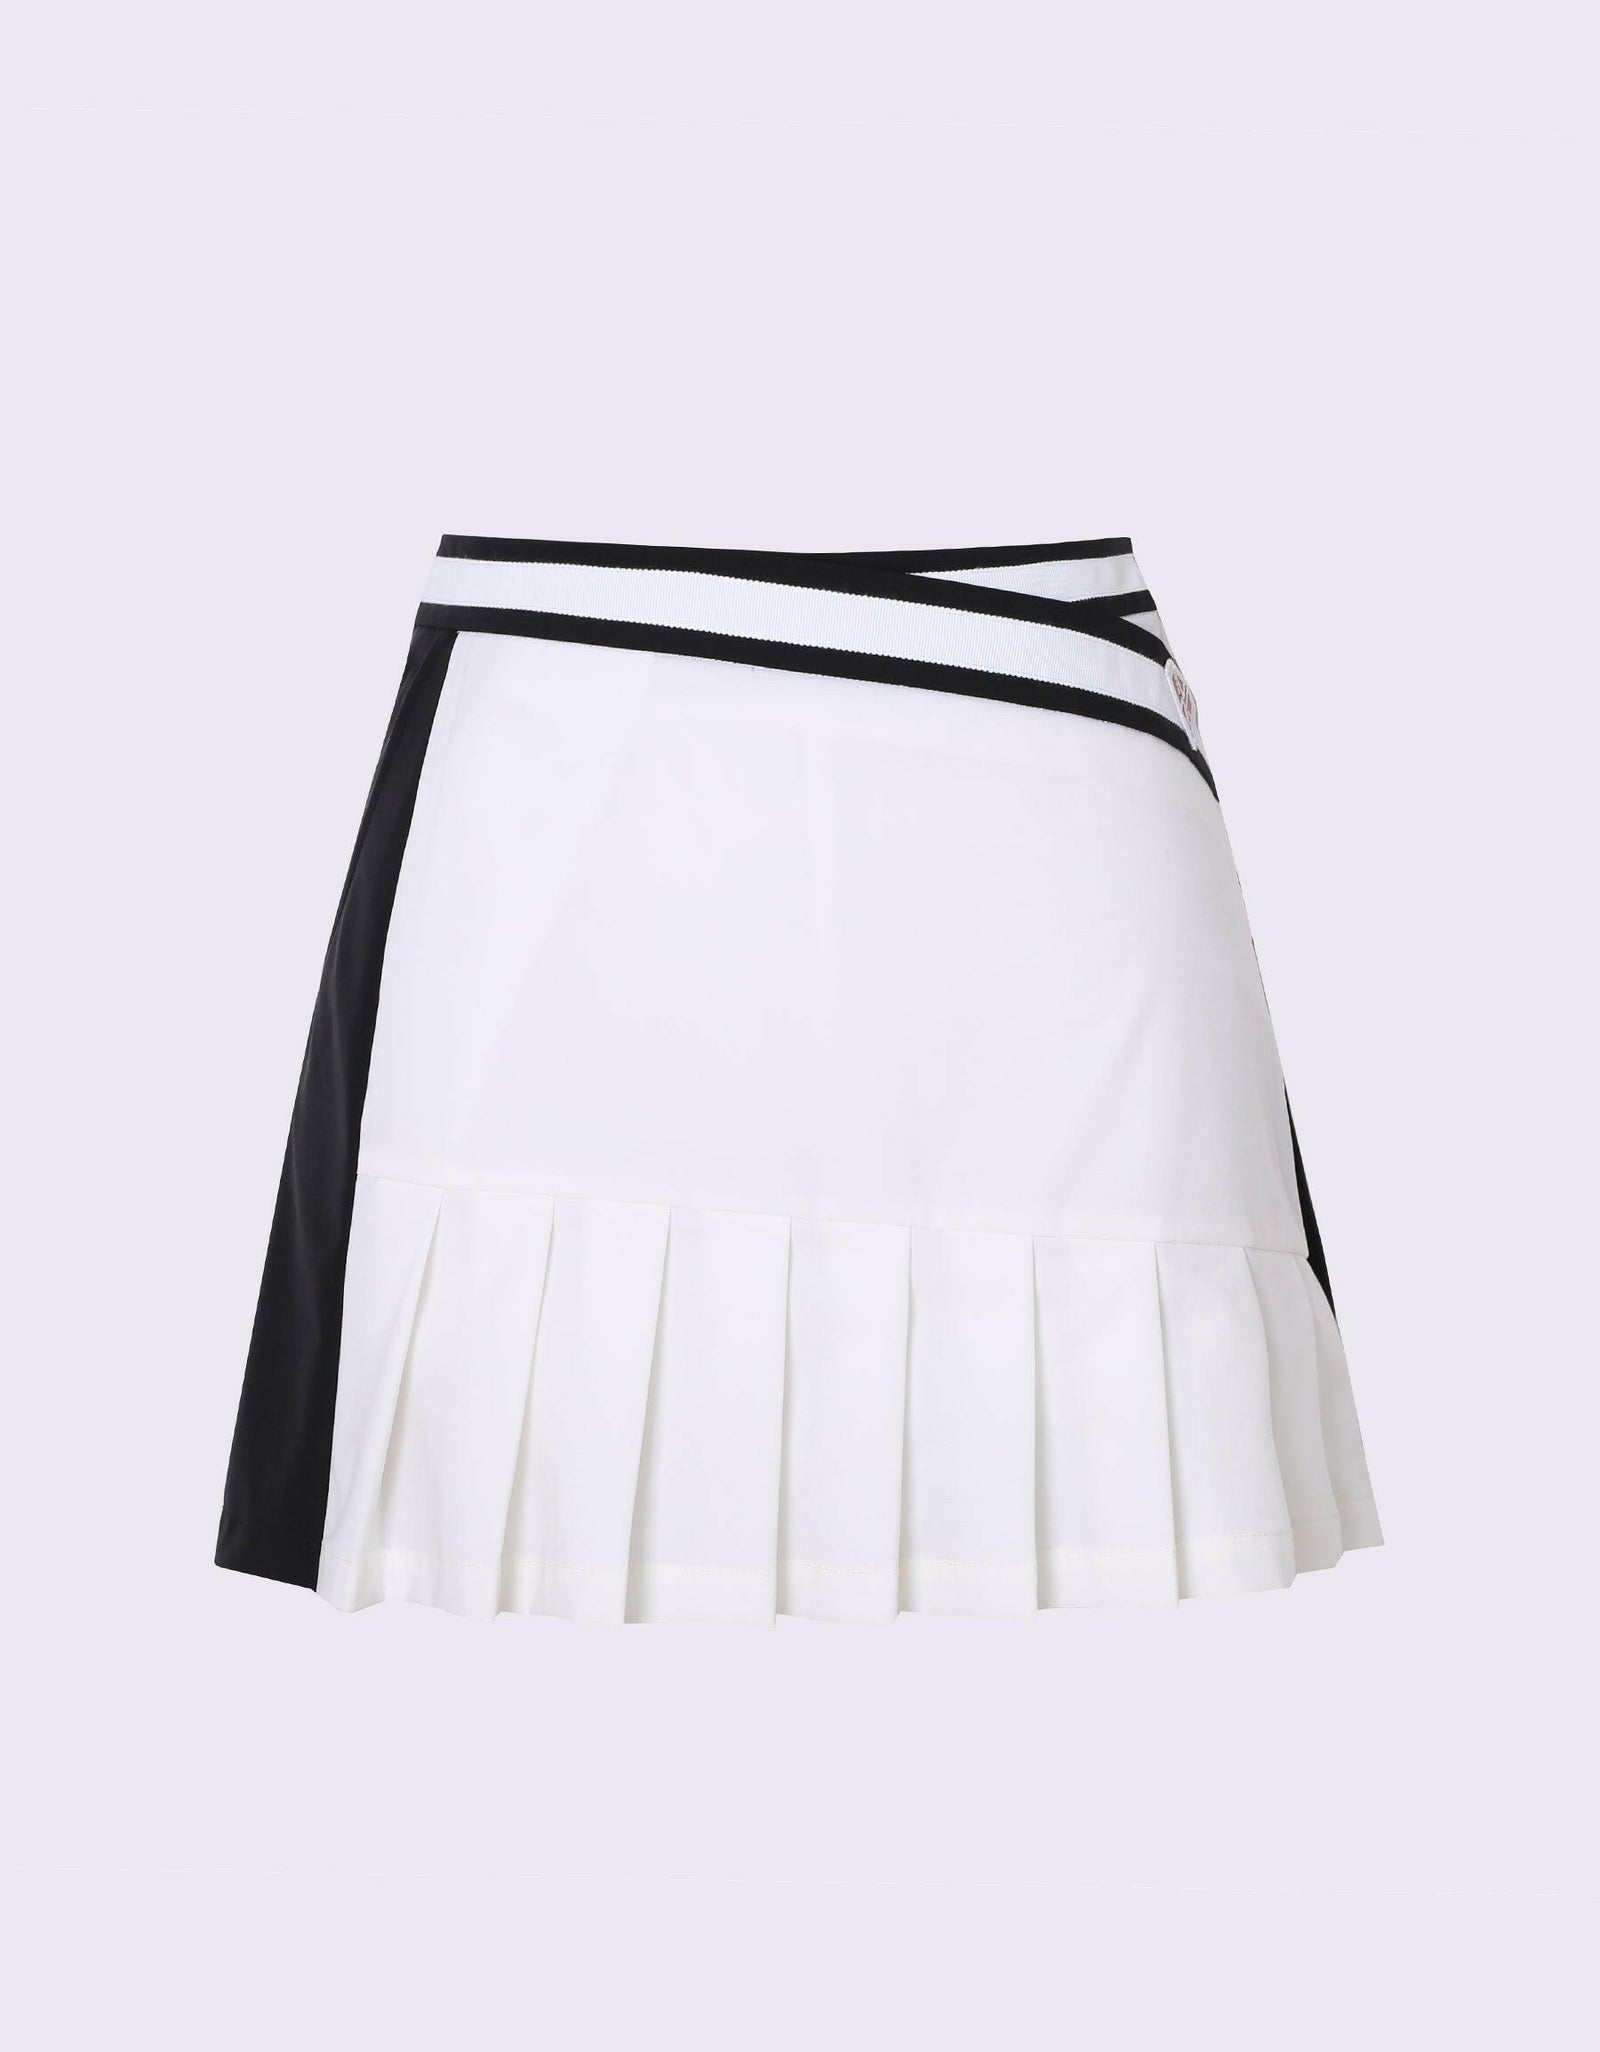 white tennis skirt with black lining